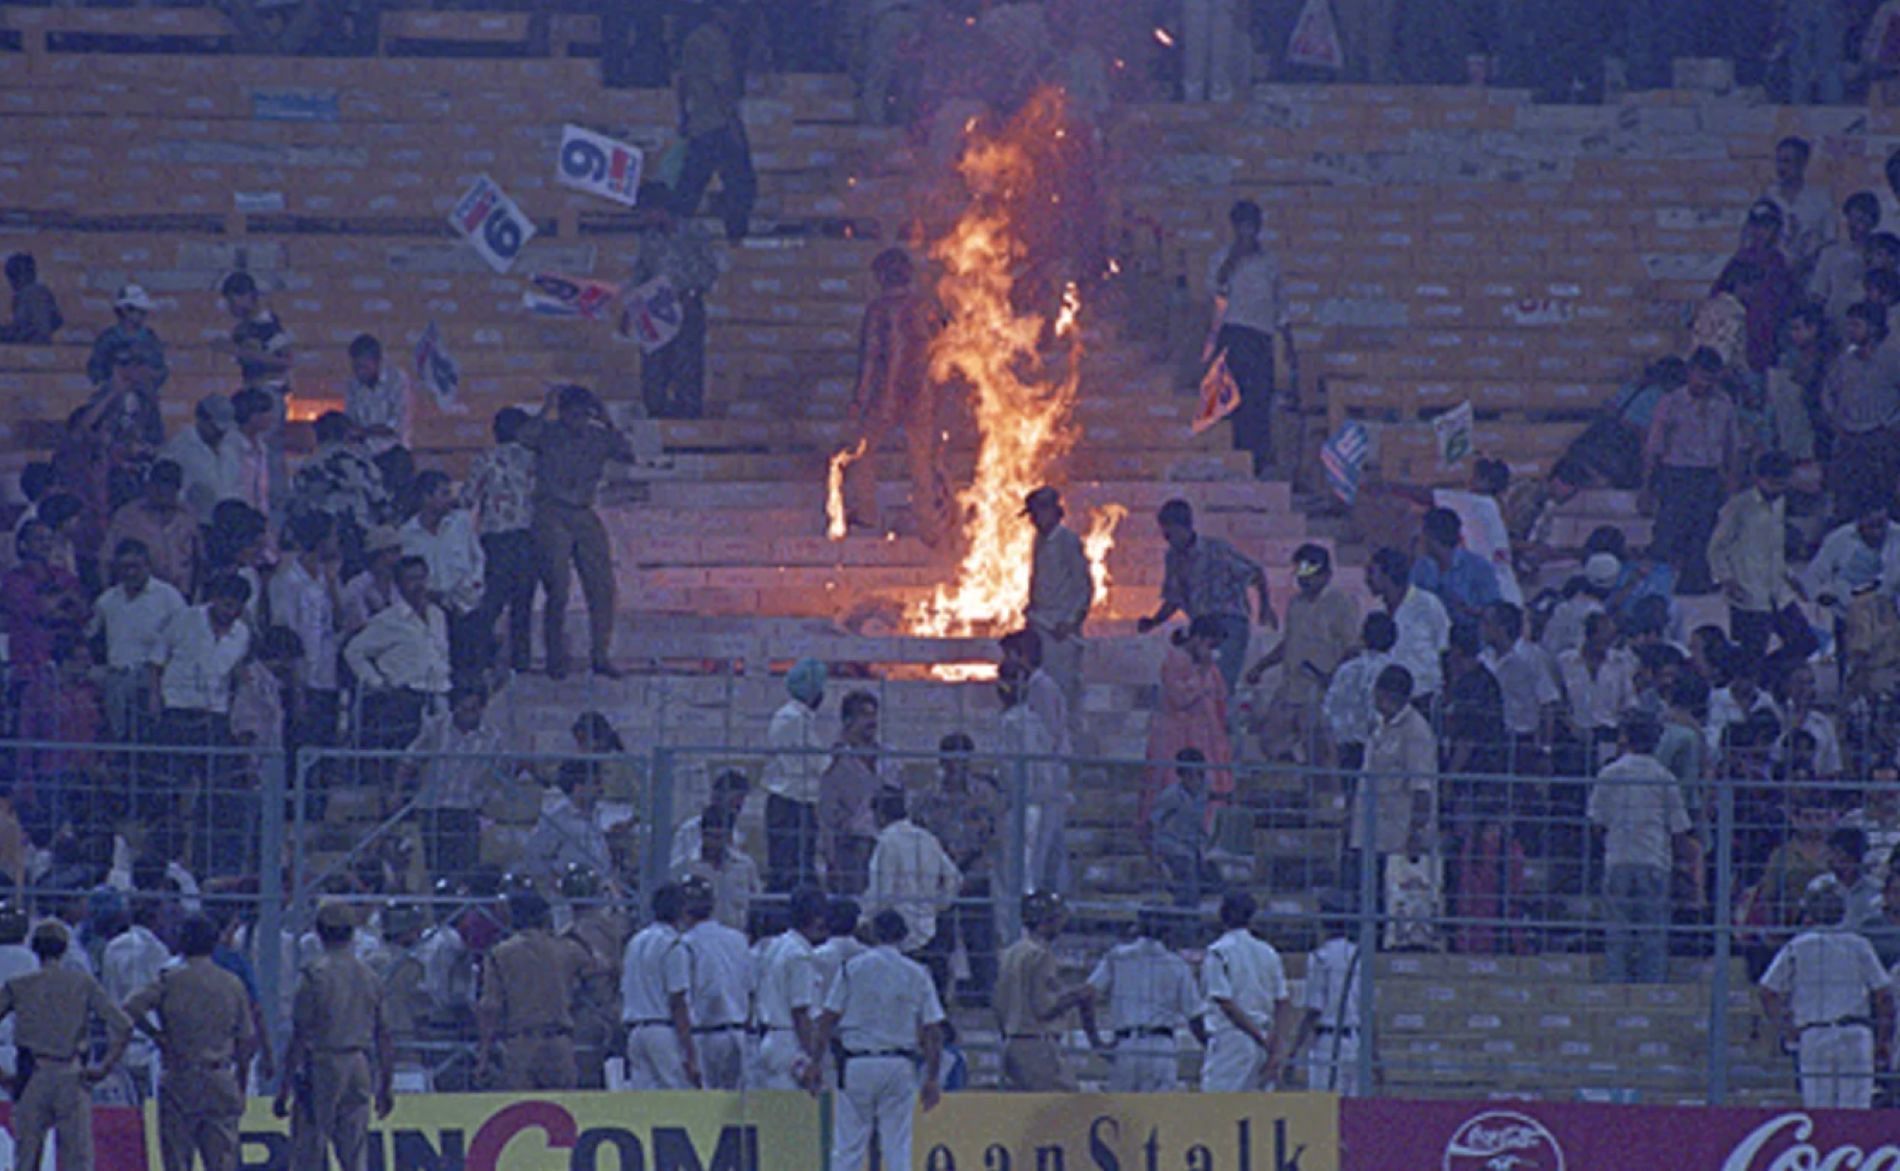 Indian fans were not impressed with the disastrous showing by the side in the 1996 semi-final.